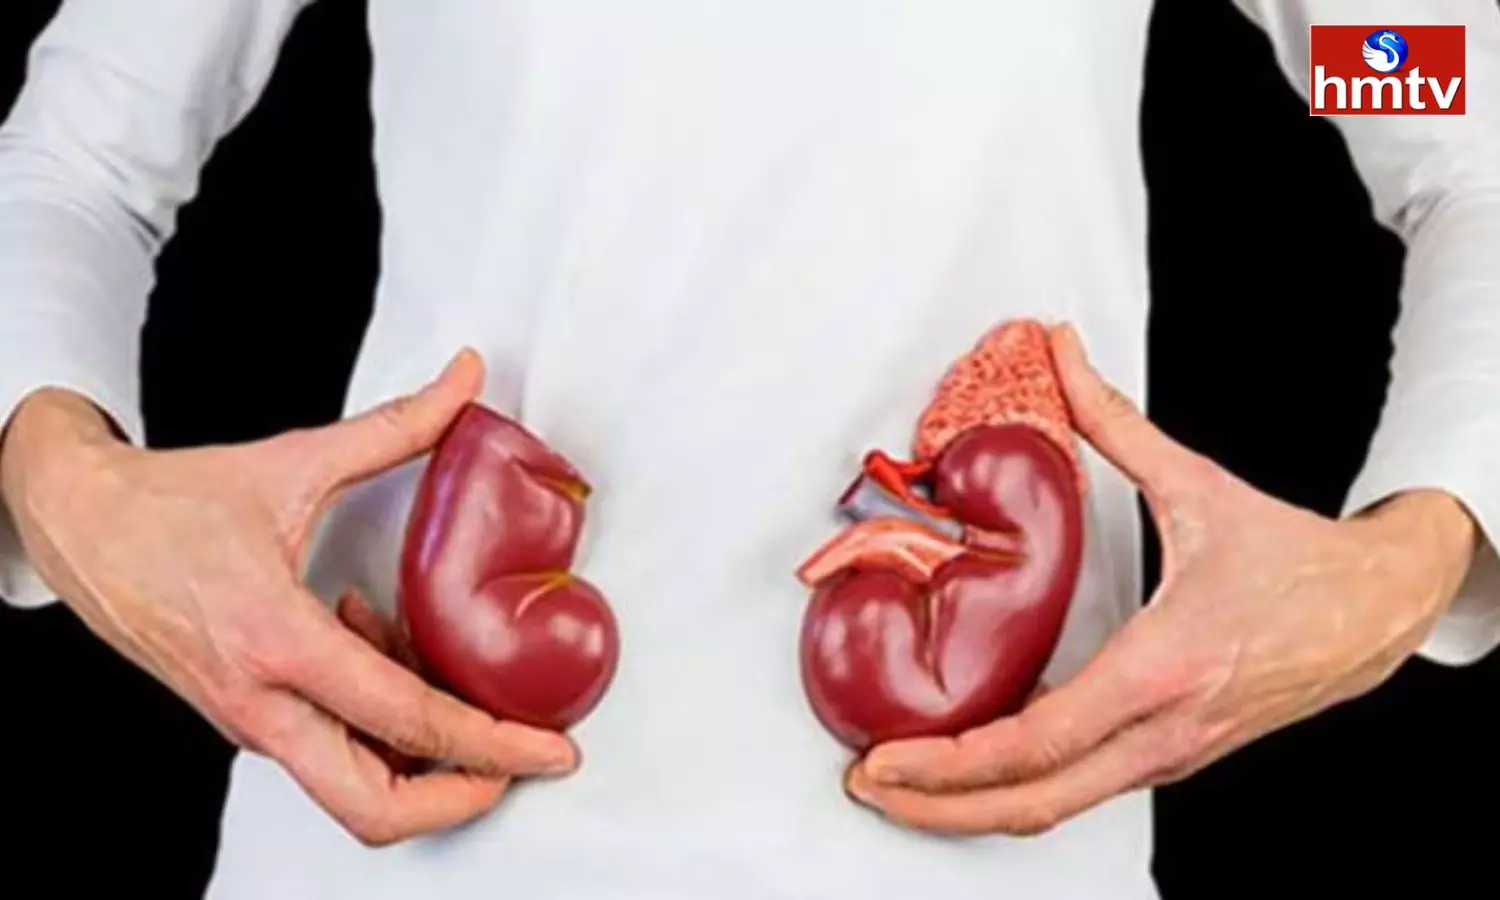 Due to These Bad Habits the Kidneys are Getting Damaged the Risk of Other Diseases is Increasing